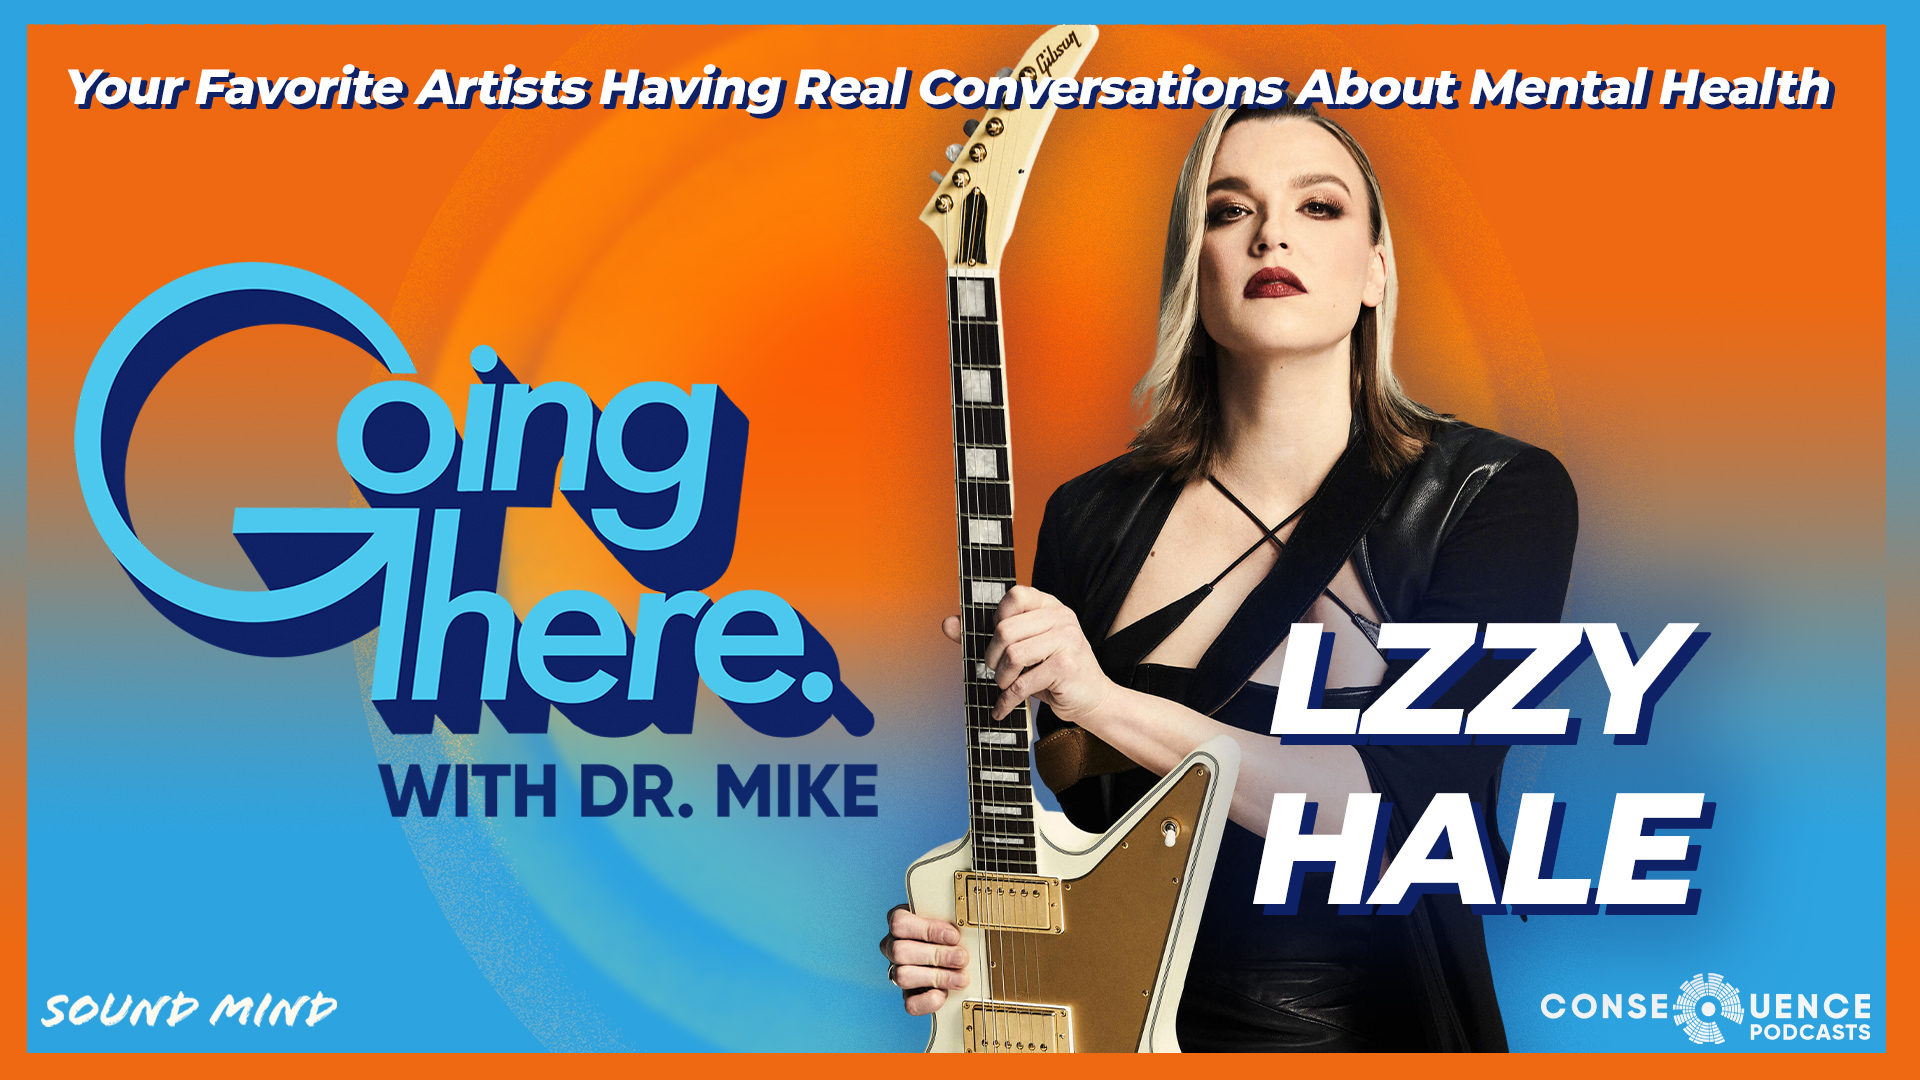 Lzzy Hale on Having Both Fame and Mental Health Struggles on the Going There Podcast